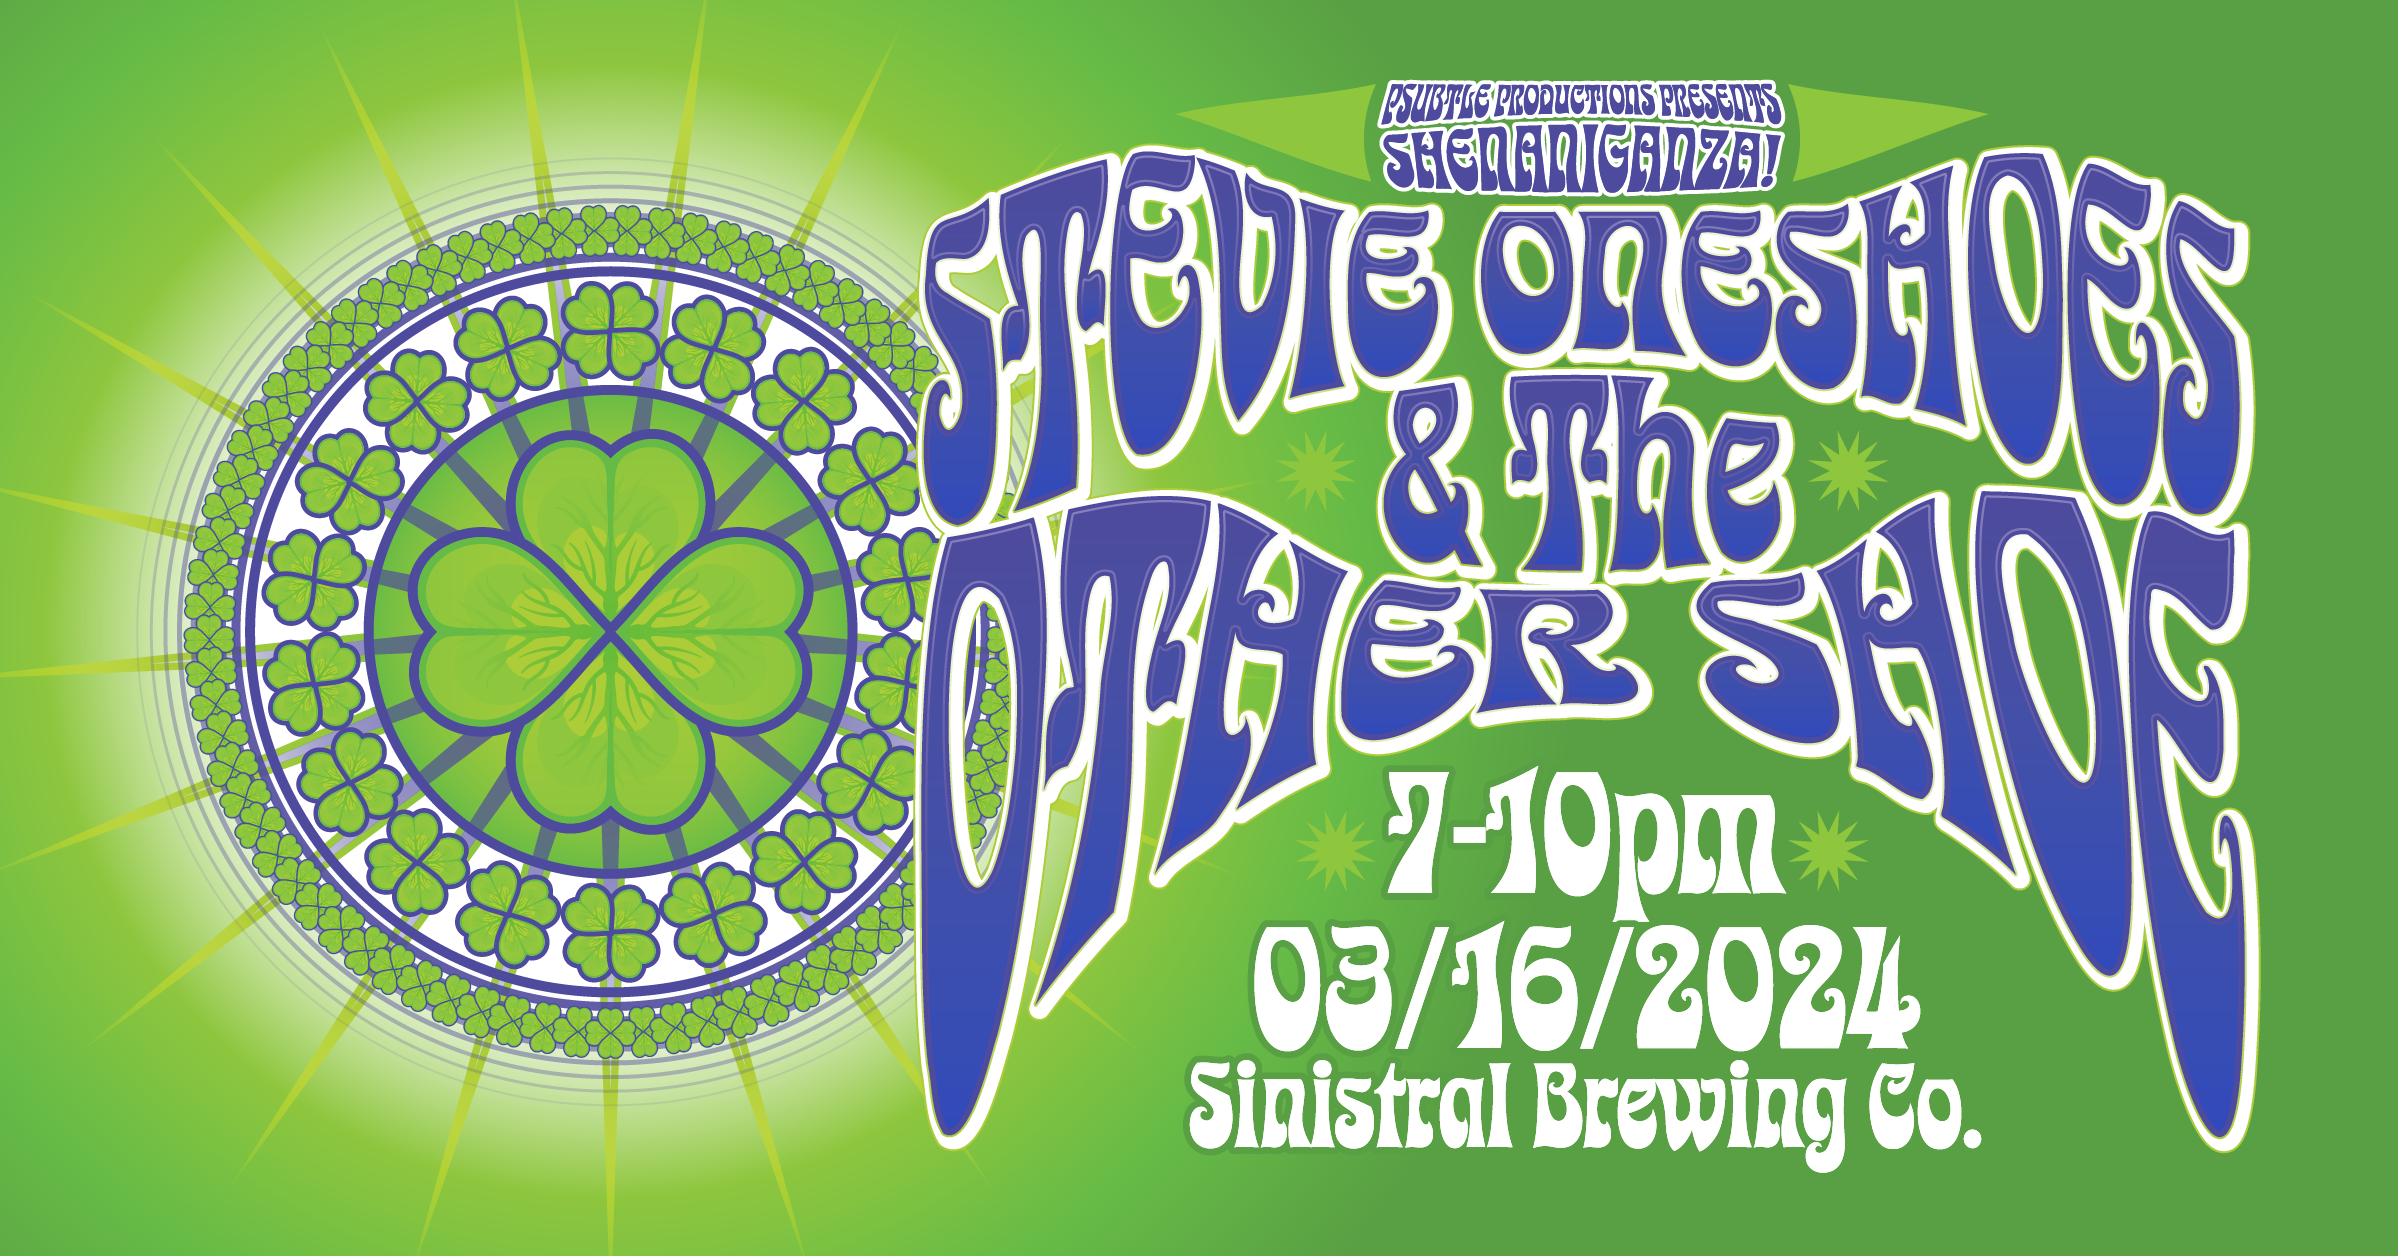 Facebook event image with stylized lettering of the event information and a shamrock mandala graphic